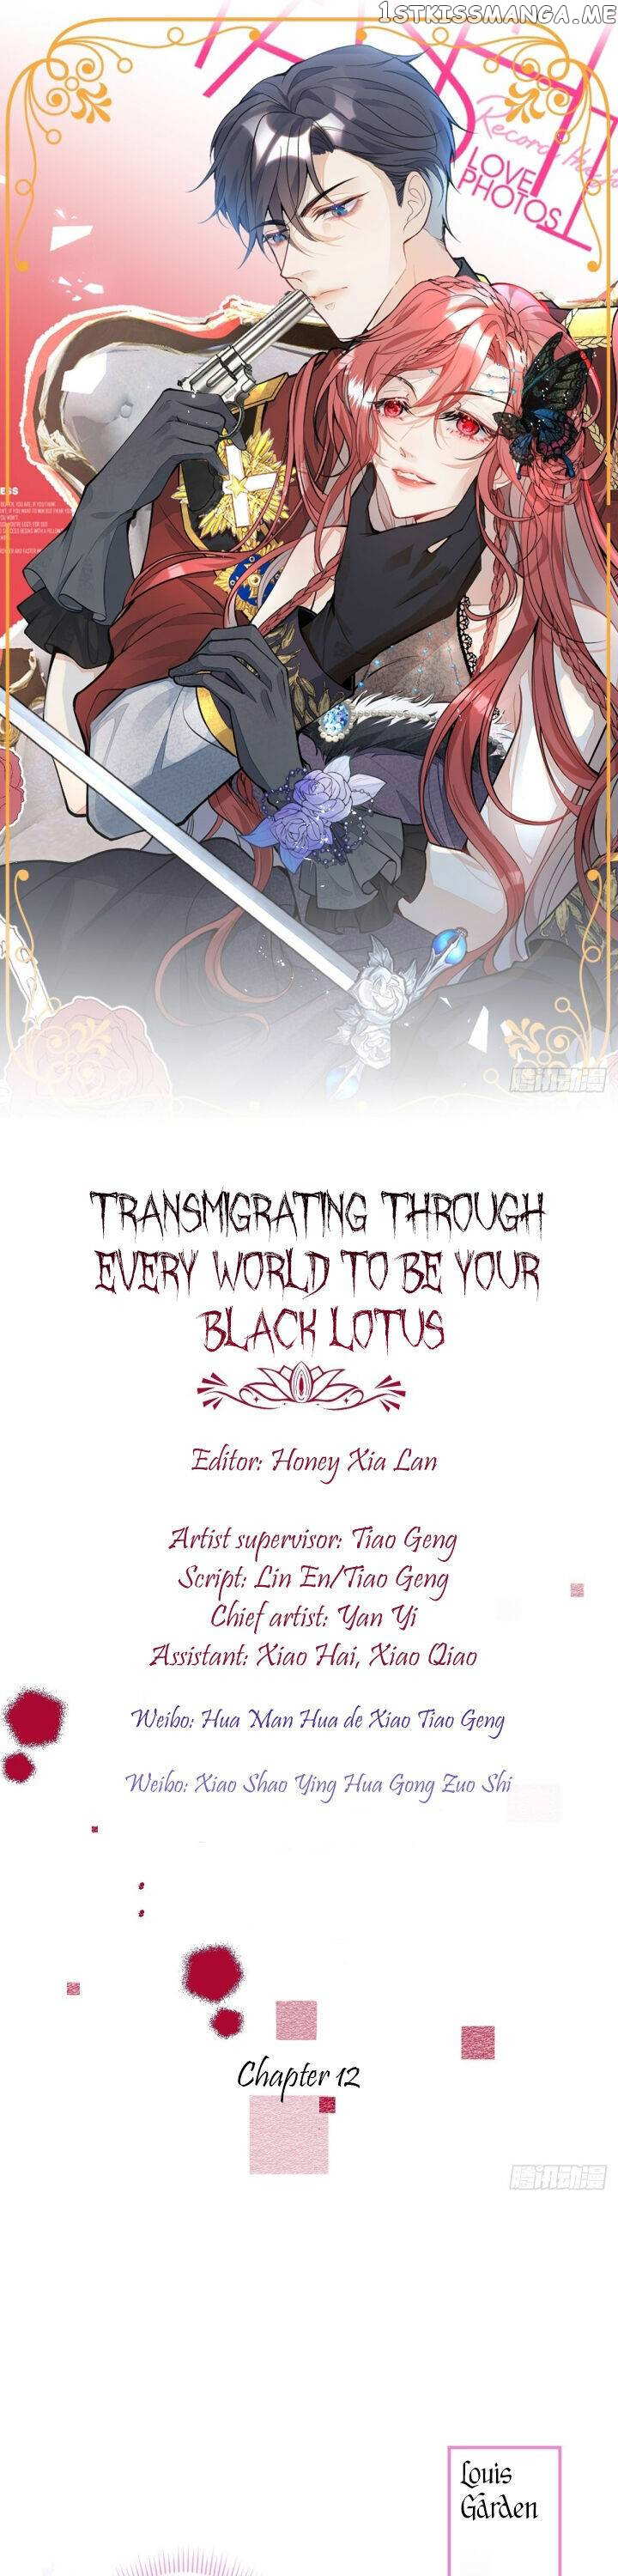 Transmigrating Through Every World To Be Your Black Lotus chapter 12 - page 1